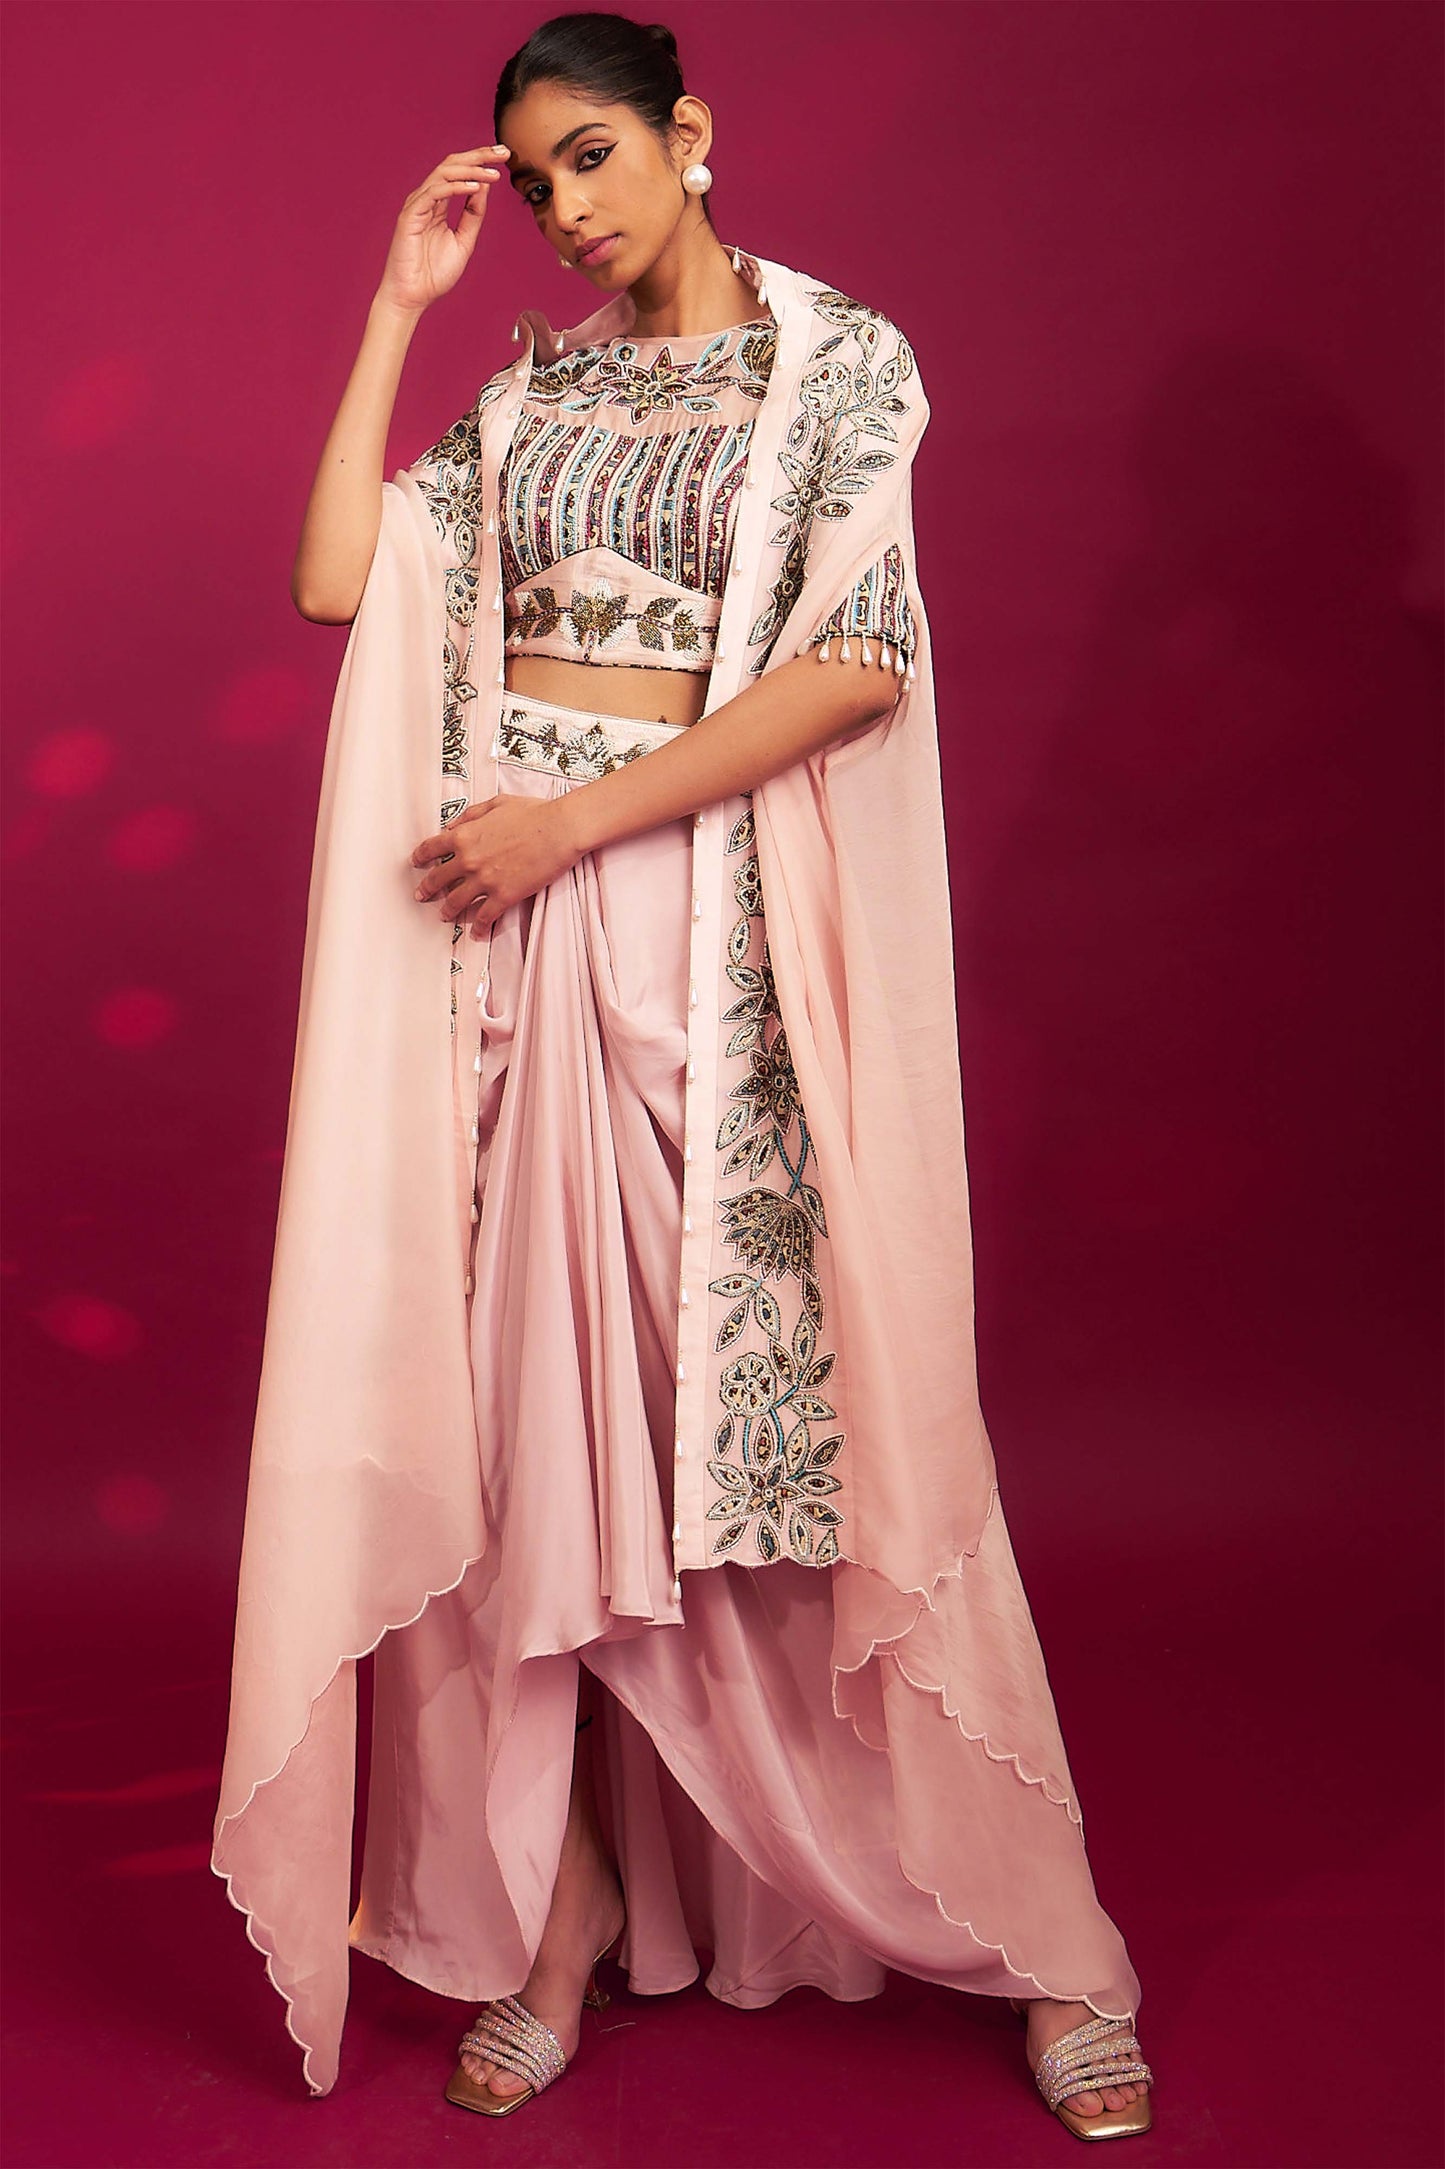 Peachy pink embellished ajrakh blouse with embroidered cape and dhoti